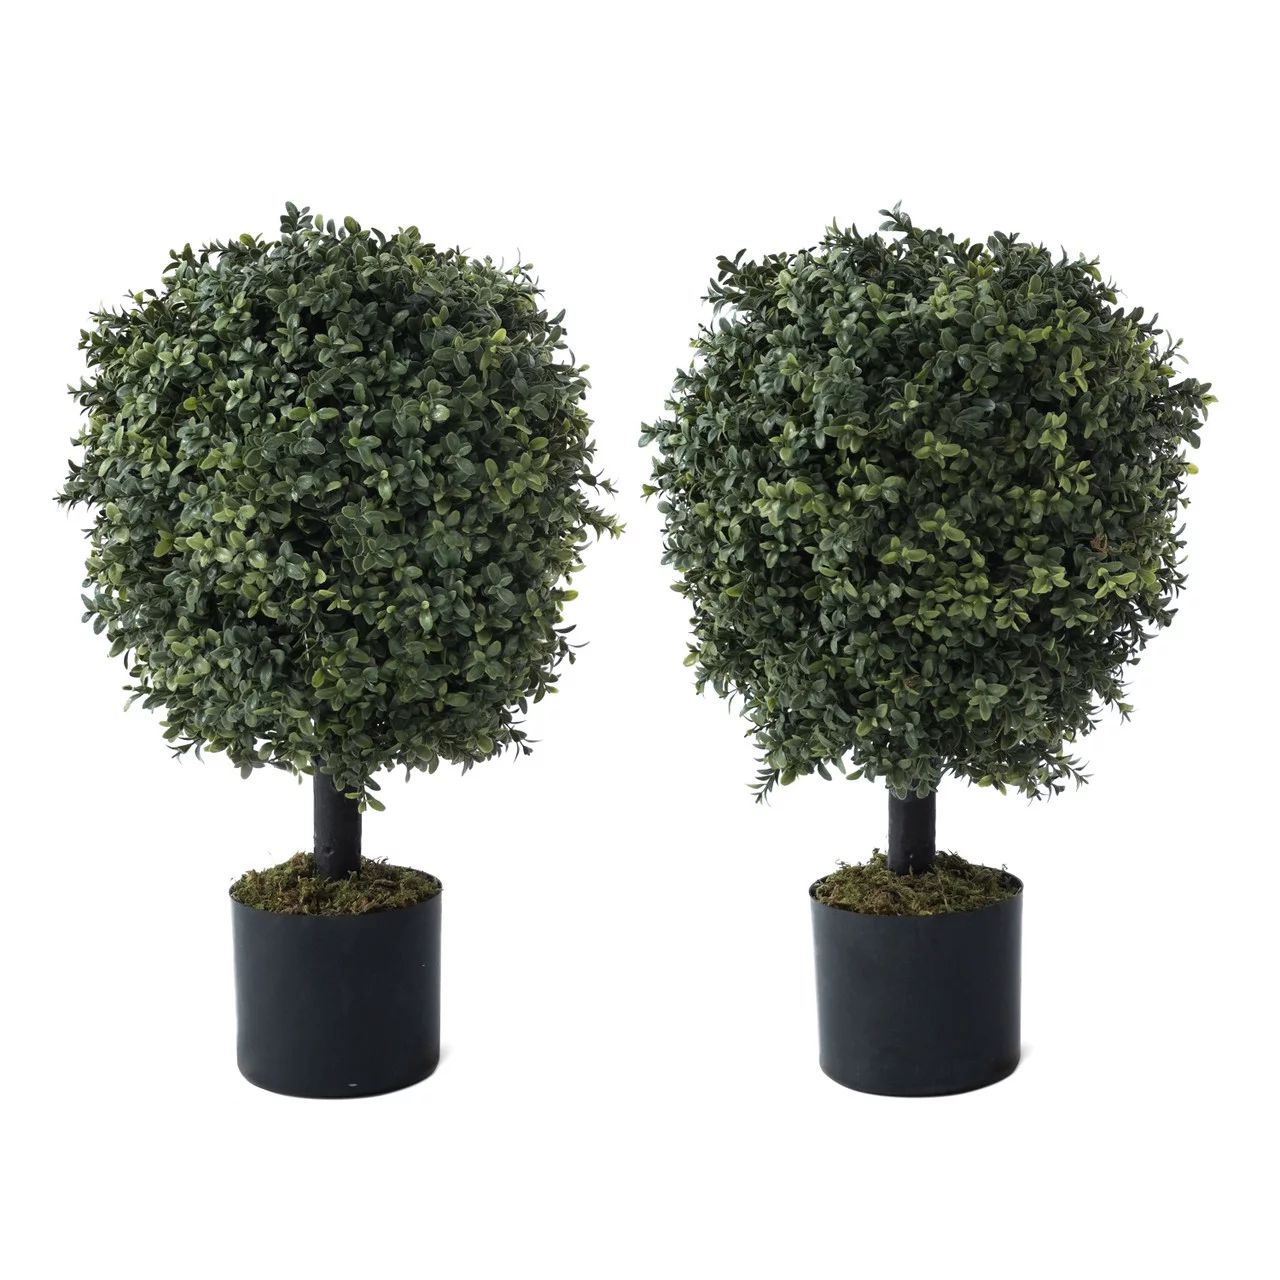 CAPHAUS Artificial Boxwood Topiary Ball Tree Set of 2, Artificial UV Resistant Bushes, Faux Potte... | Walmart (US)